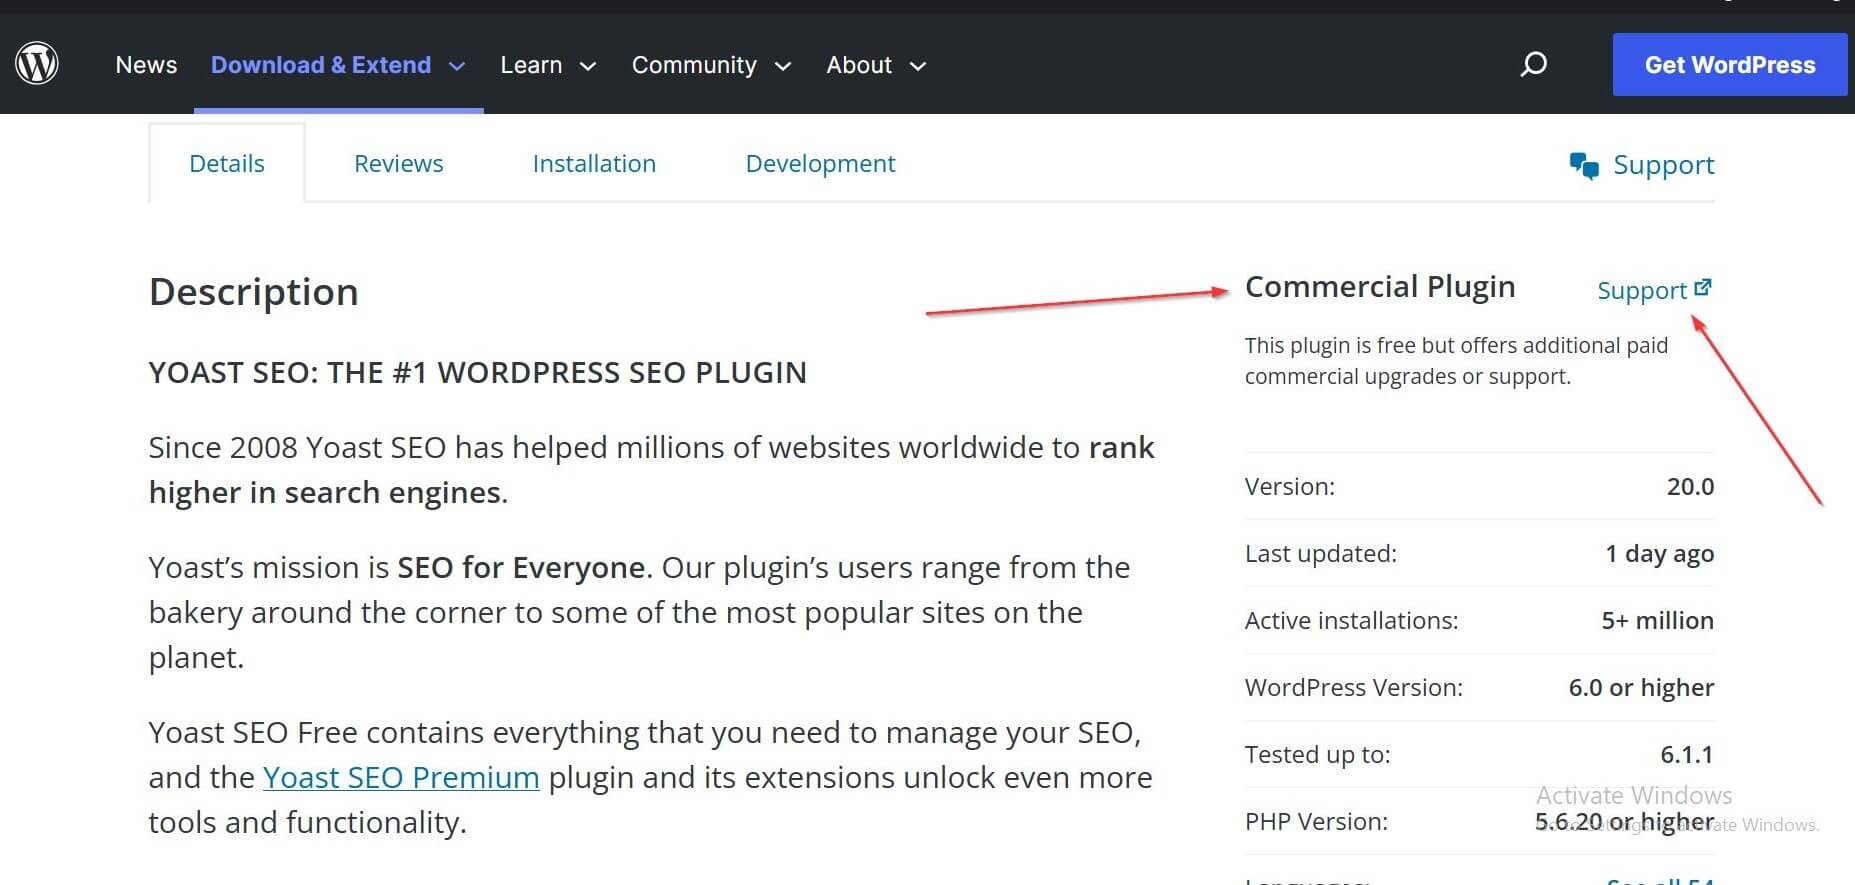 WordPress Commercial Plugin label for paid upgrade